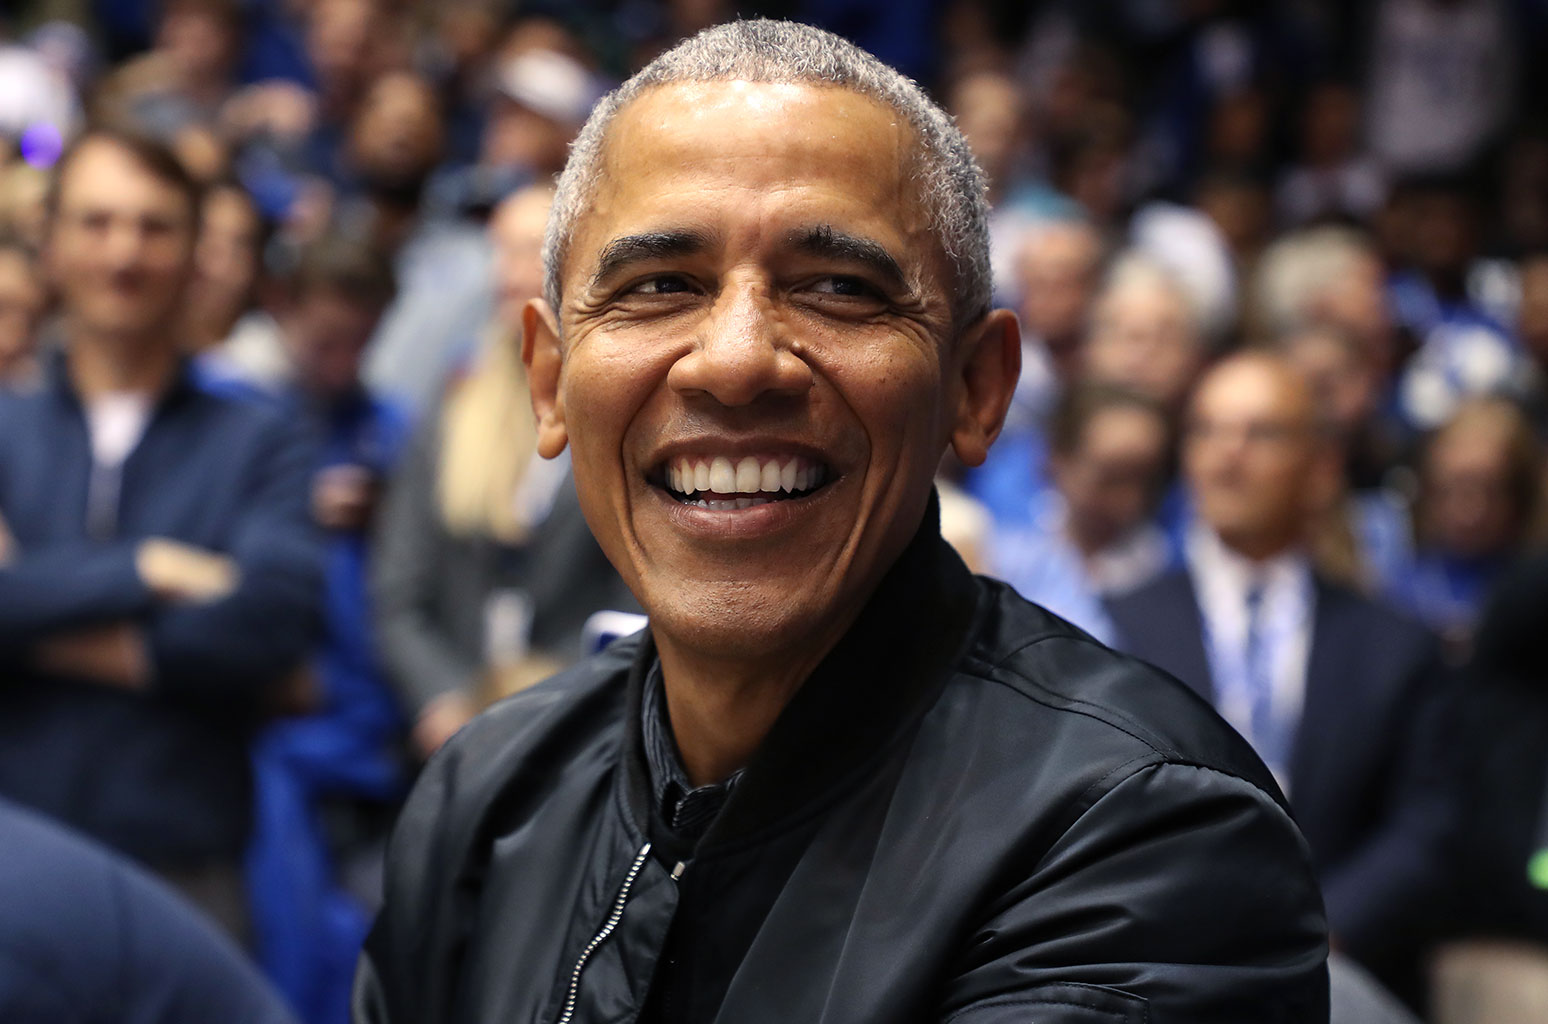 Barack Obama Unveils His Favorite Songs of 2019, From Beyonce to DaBaby - www.billboard.com